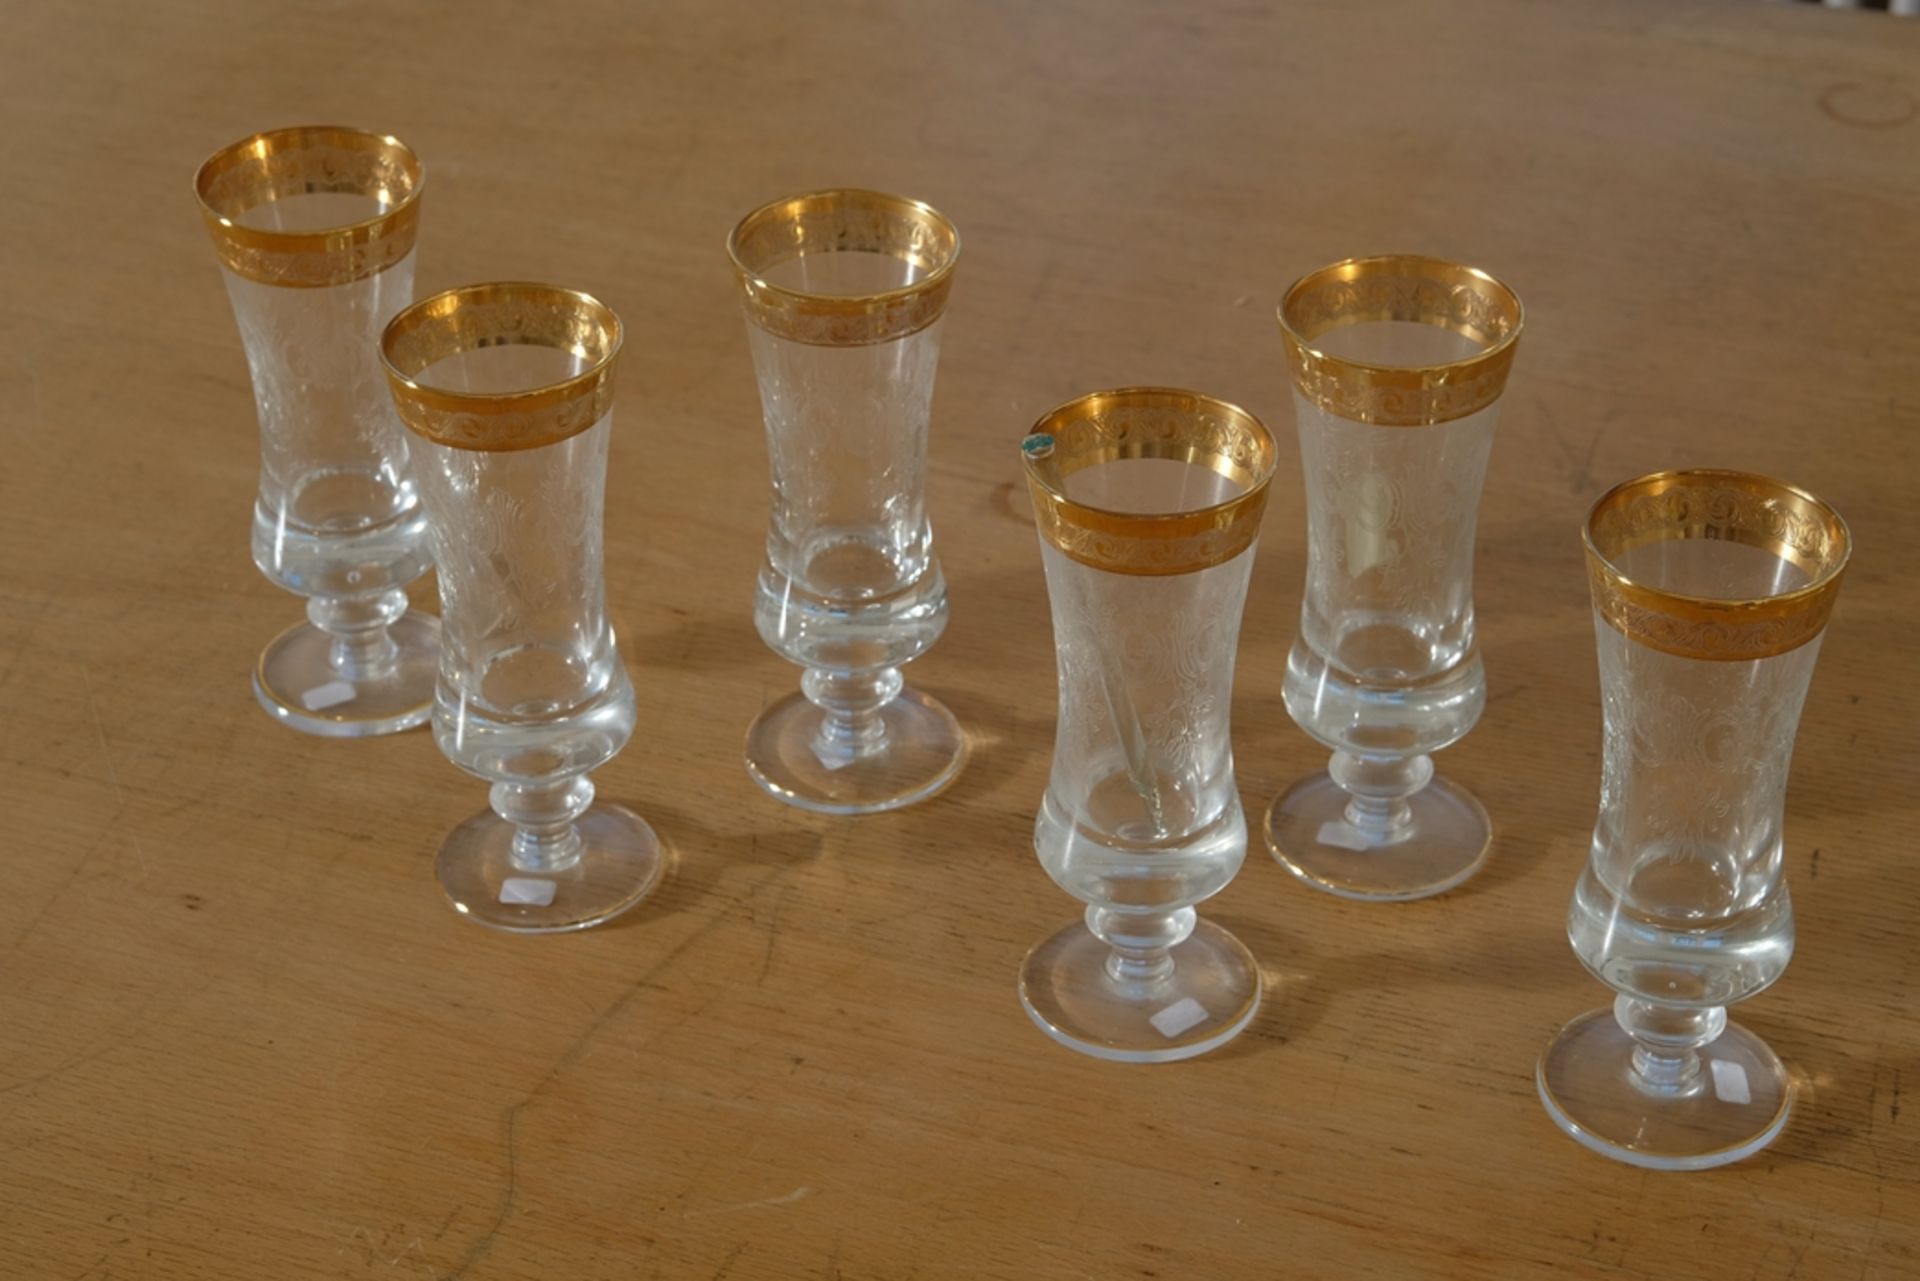 Murano Medici gold rim, six champagne flutes, crystal glass engraved with plant motifs. - Image 2 of 3